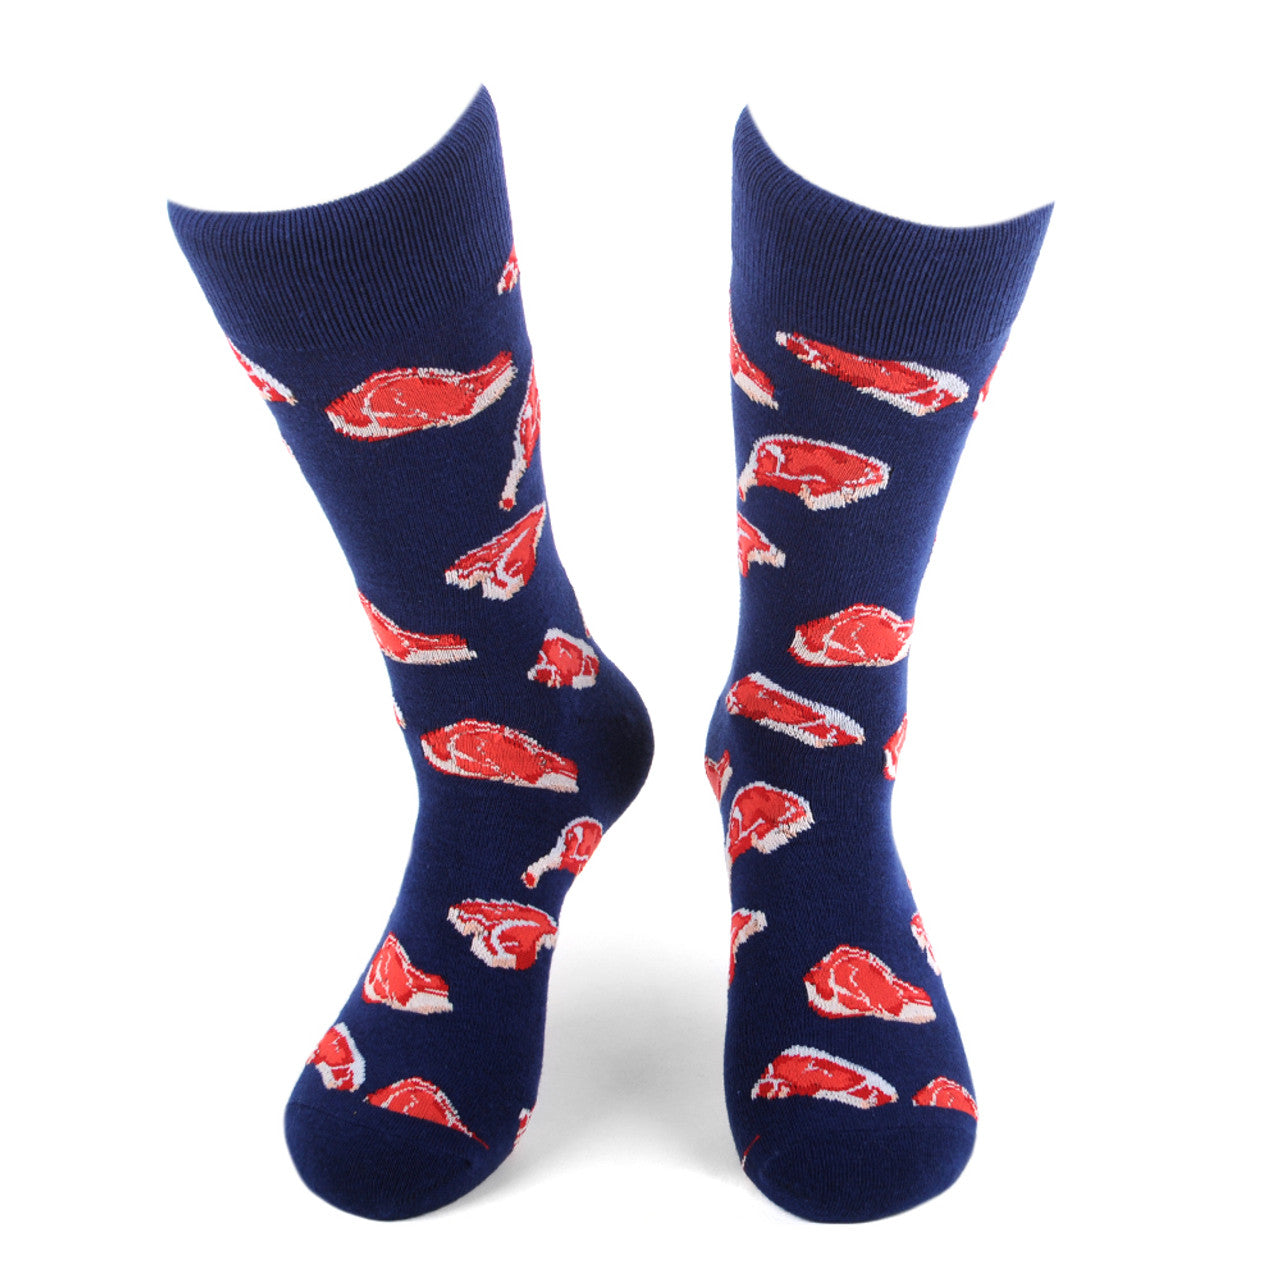 Men's Steak Meat Lovers Crew Socks - Perfect for the grill master!